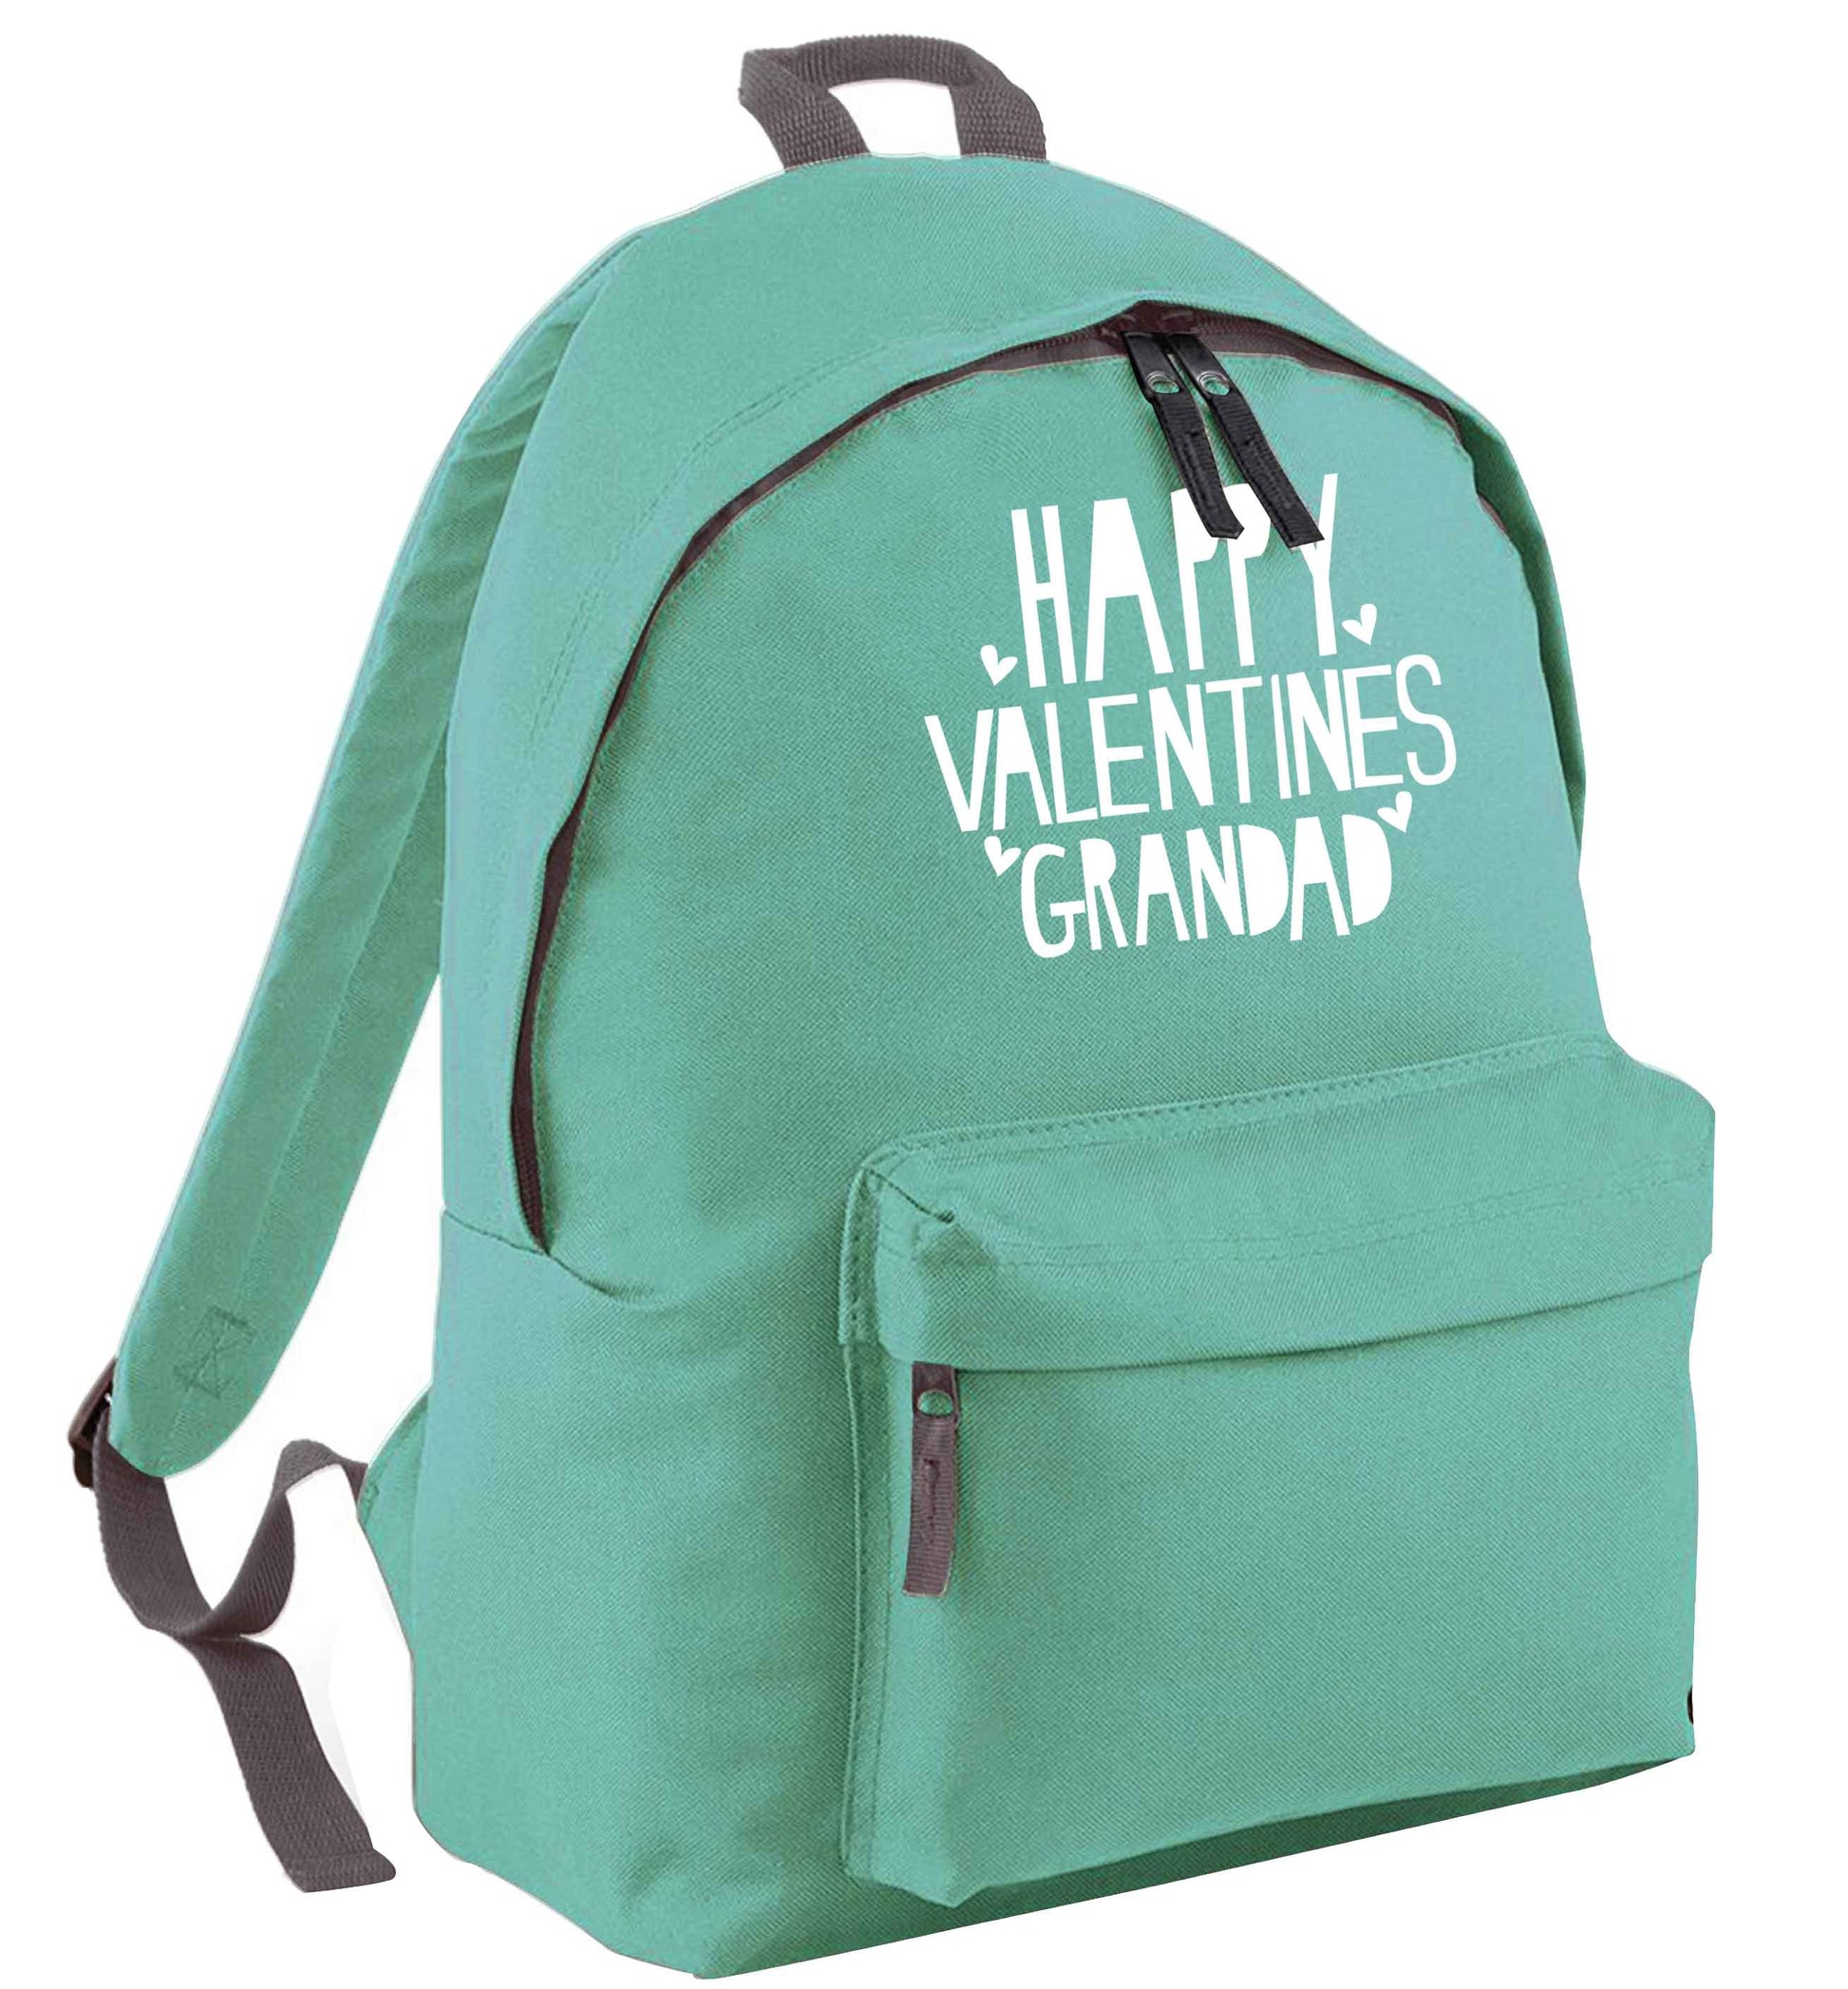 Happy valentines grandad mint adults backpack